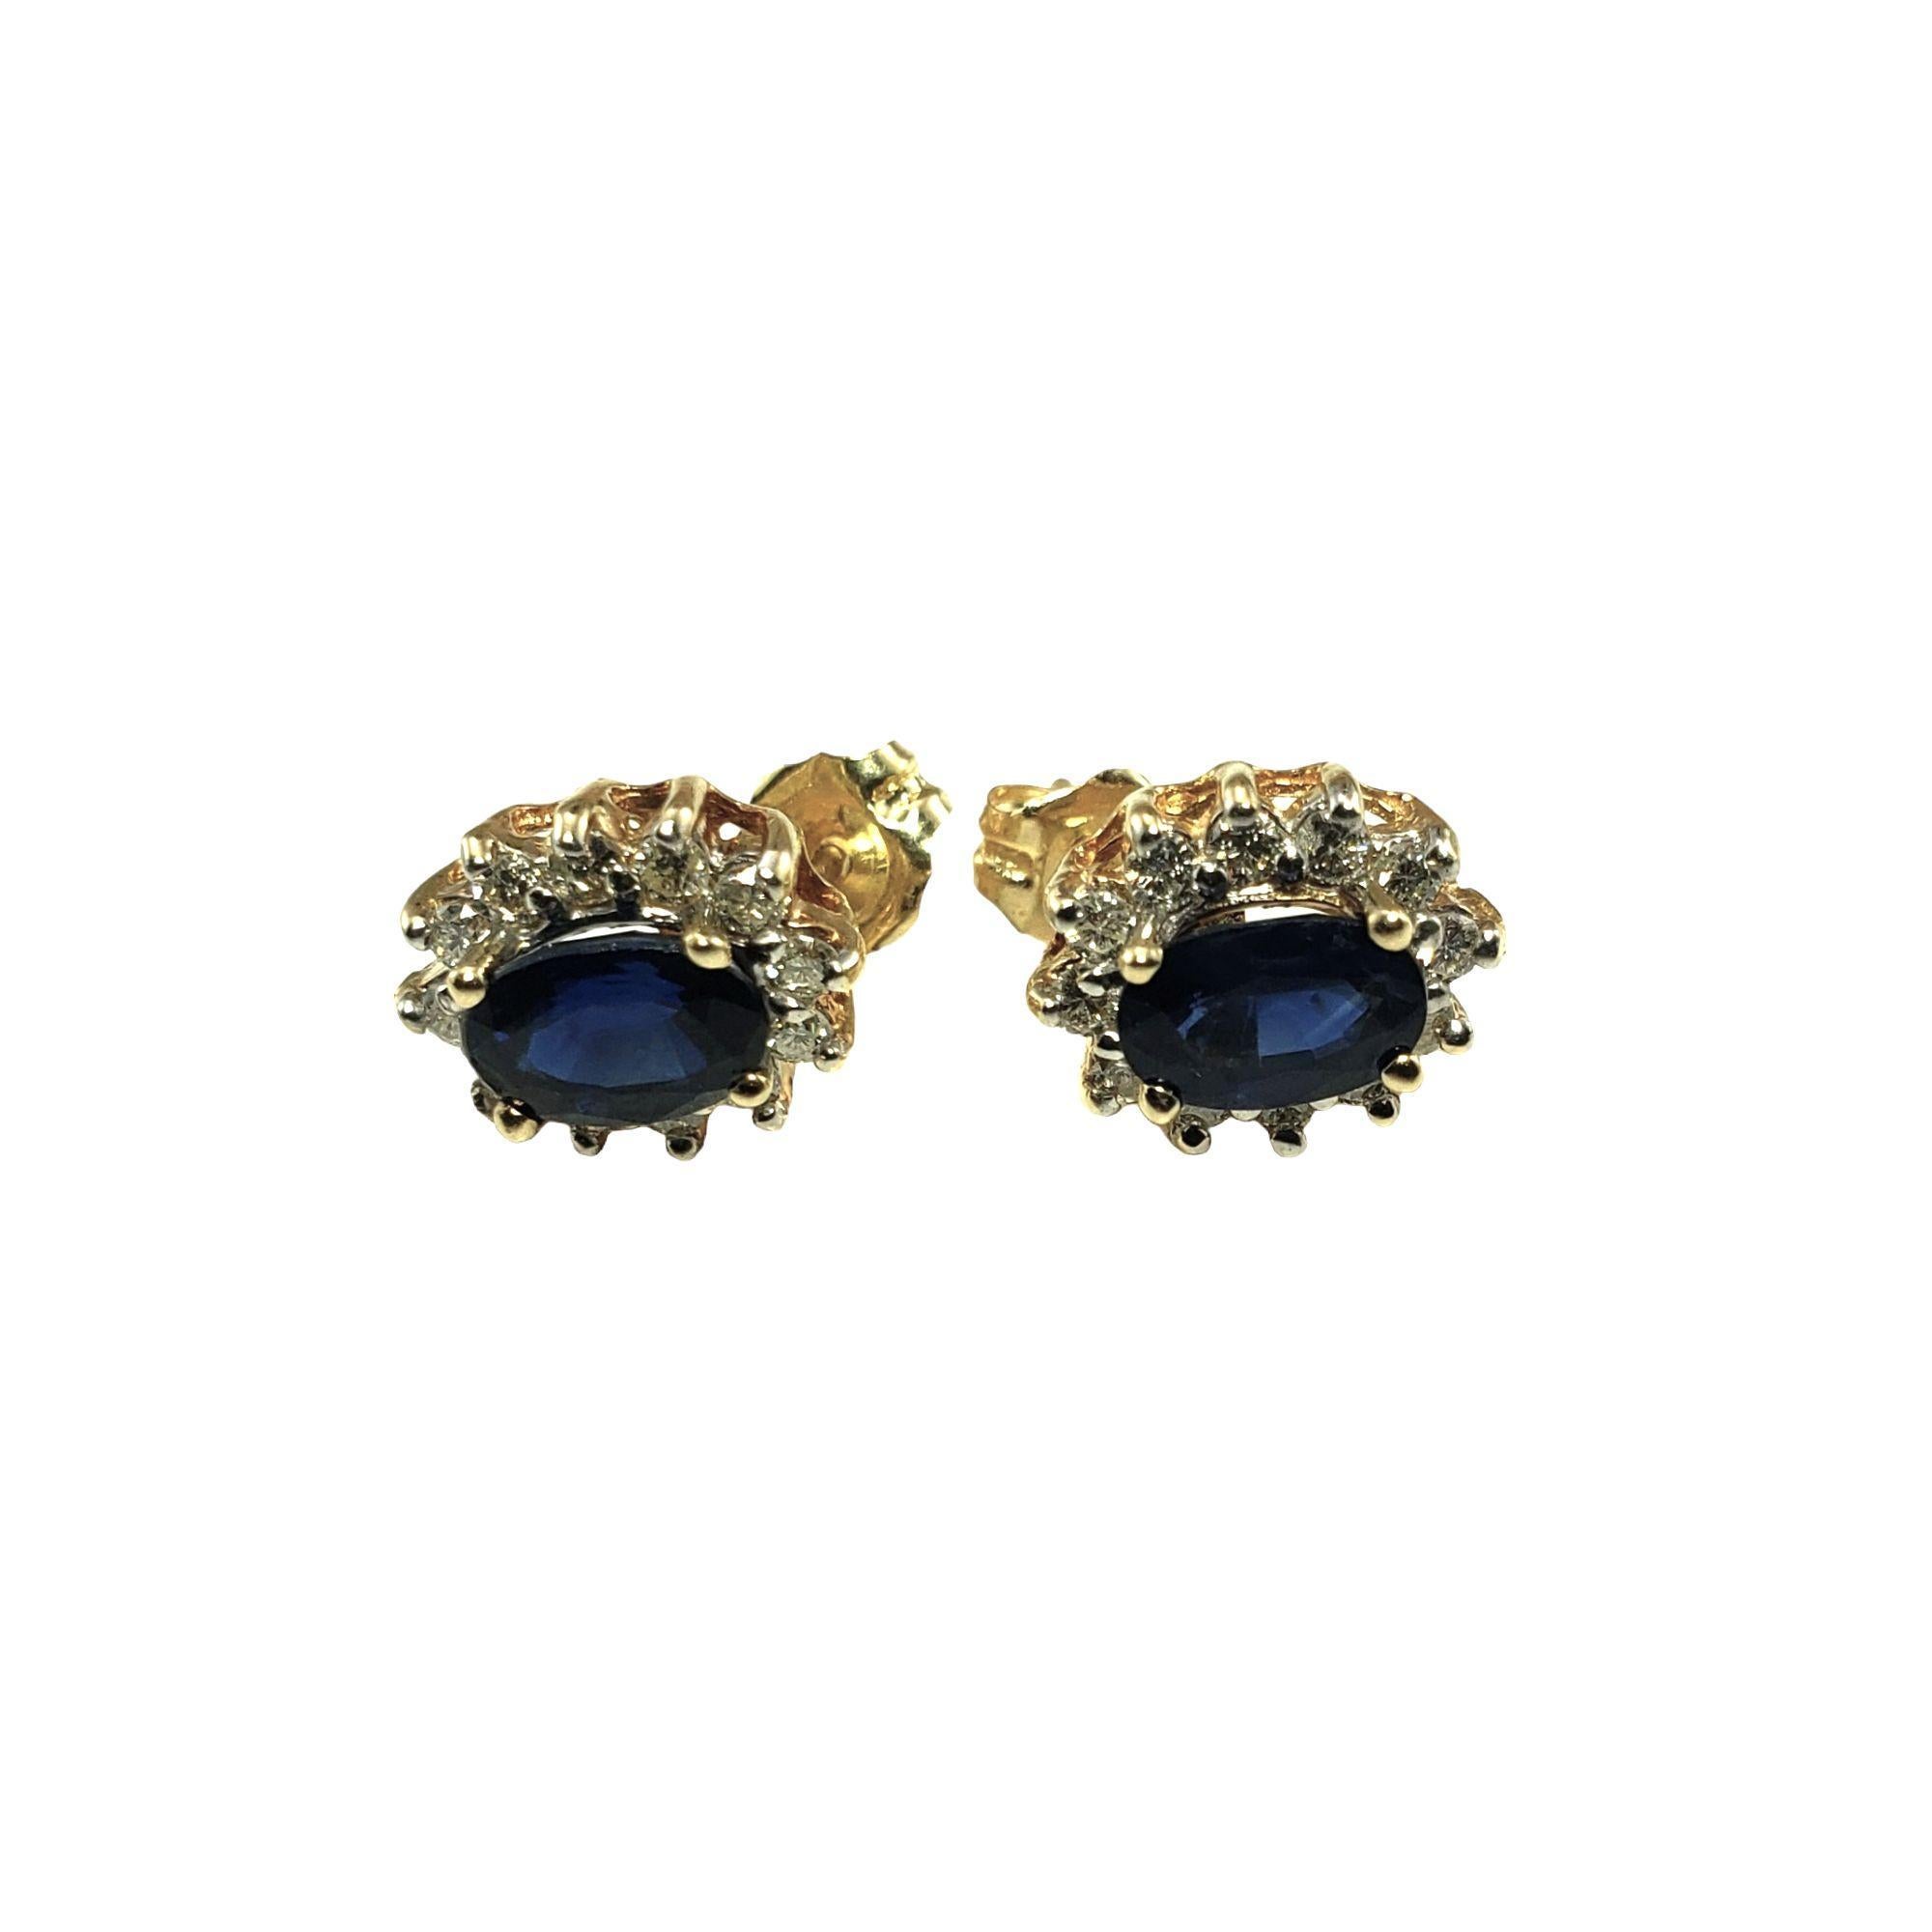 14 Karat Yellow Gold Sapphire and Diamond Earrings-

These lovely earrings each feature one oval sapphire (6 mm x 4 mm) surrounded by 12 round brilliant cut diamonds. Push back closures.

Total sapphire weight:  1.22 ct.

Total diamond weight: .30